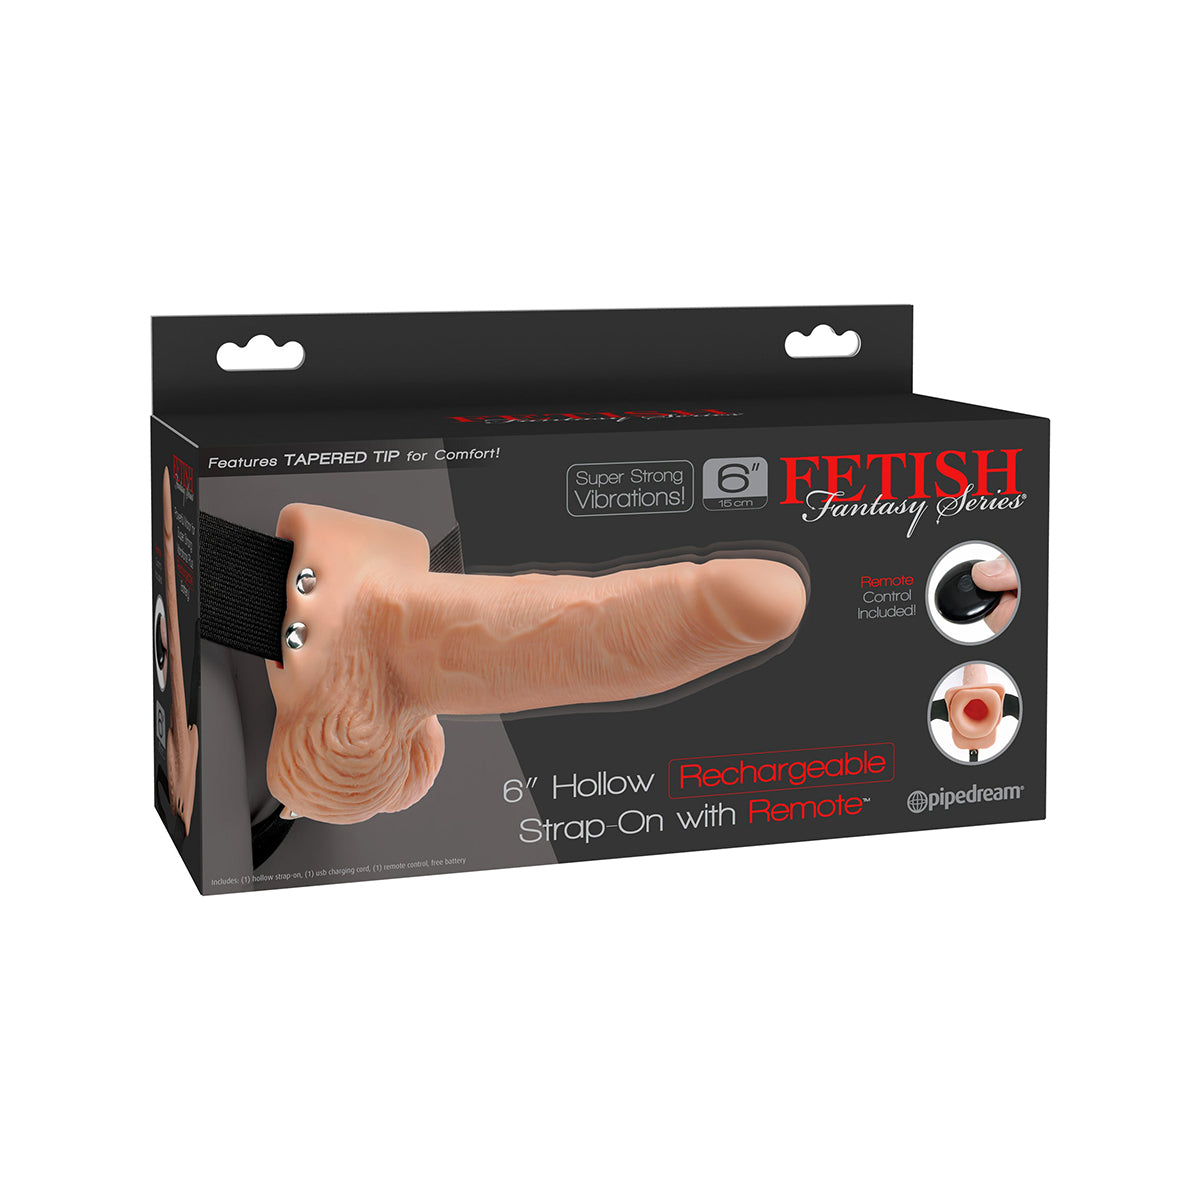 Fetish Fantasy 6" Hollow Rechargeable Strap-On with Remote - Flesh